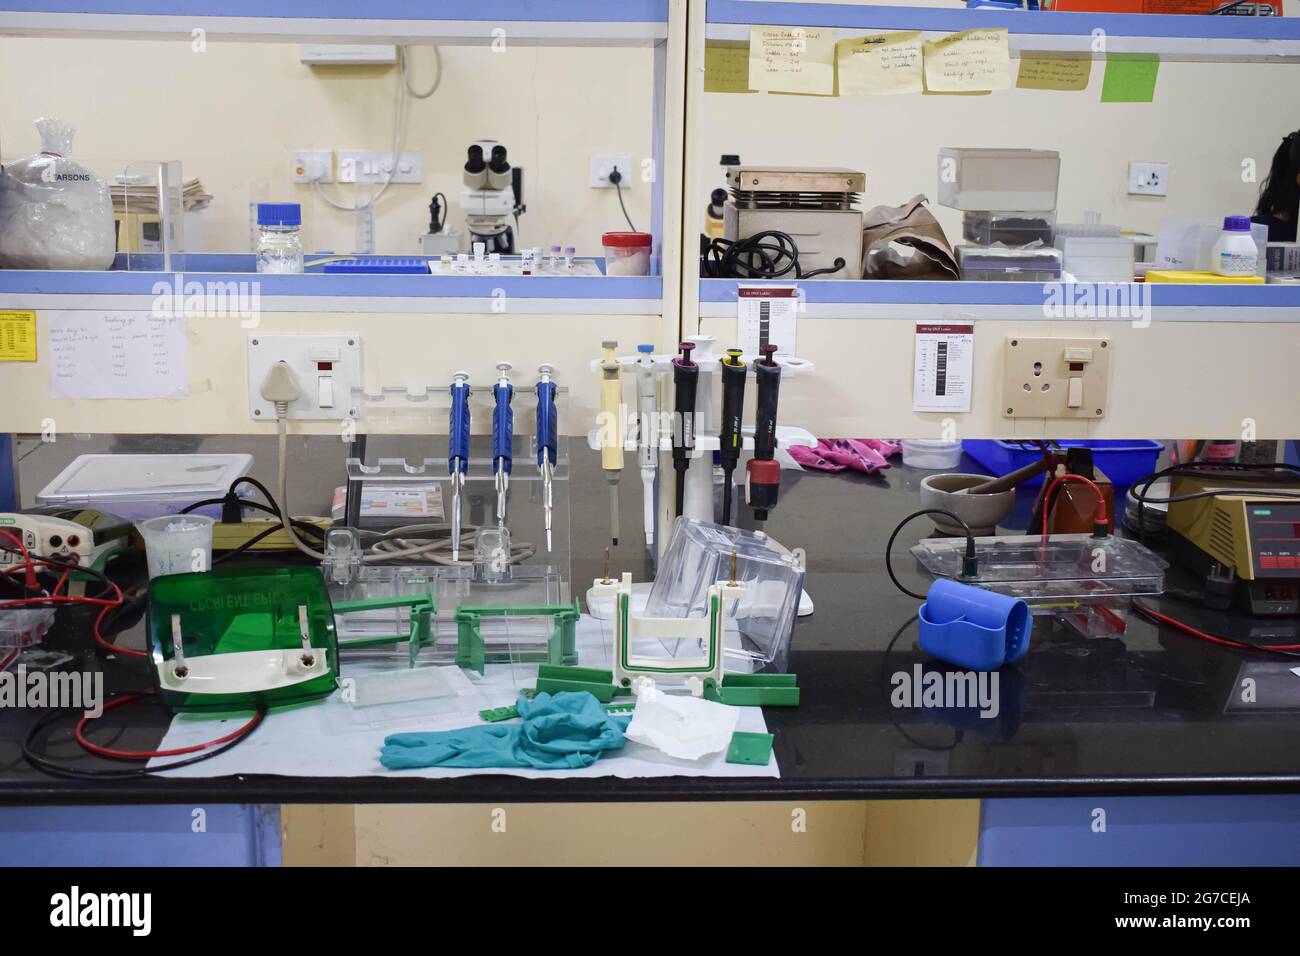 Laboratory Equipment in Science Research Lab #17 Photograph by